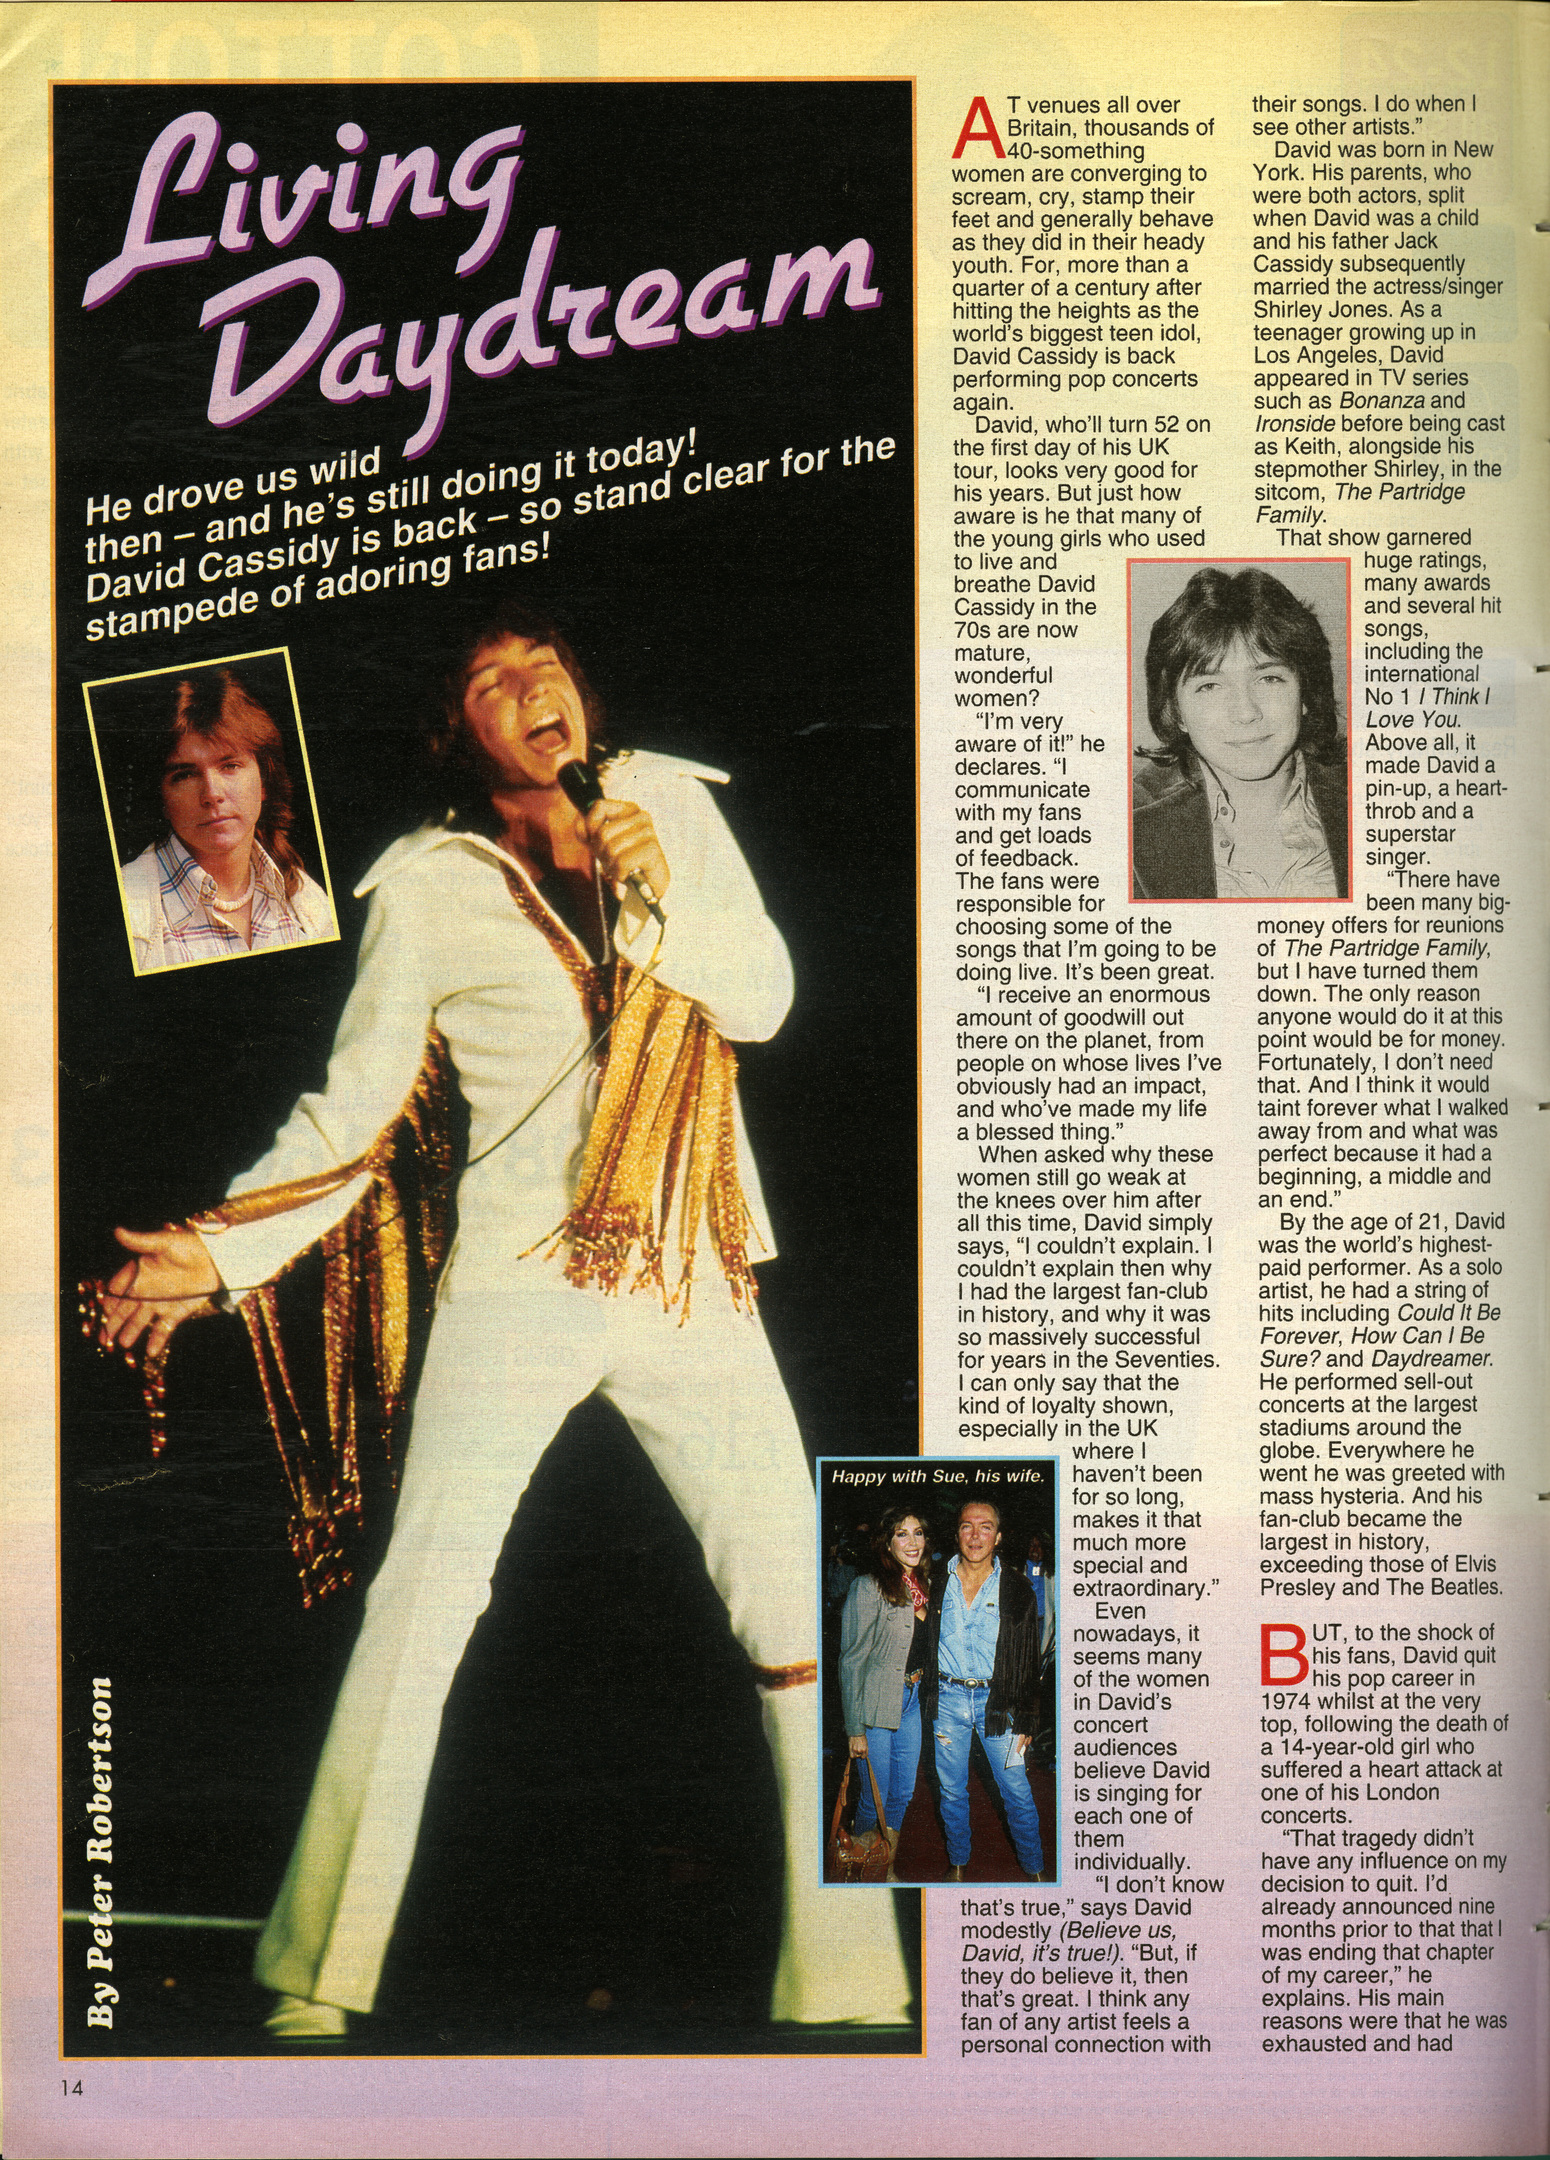 pictures of David Cassidy